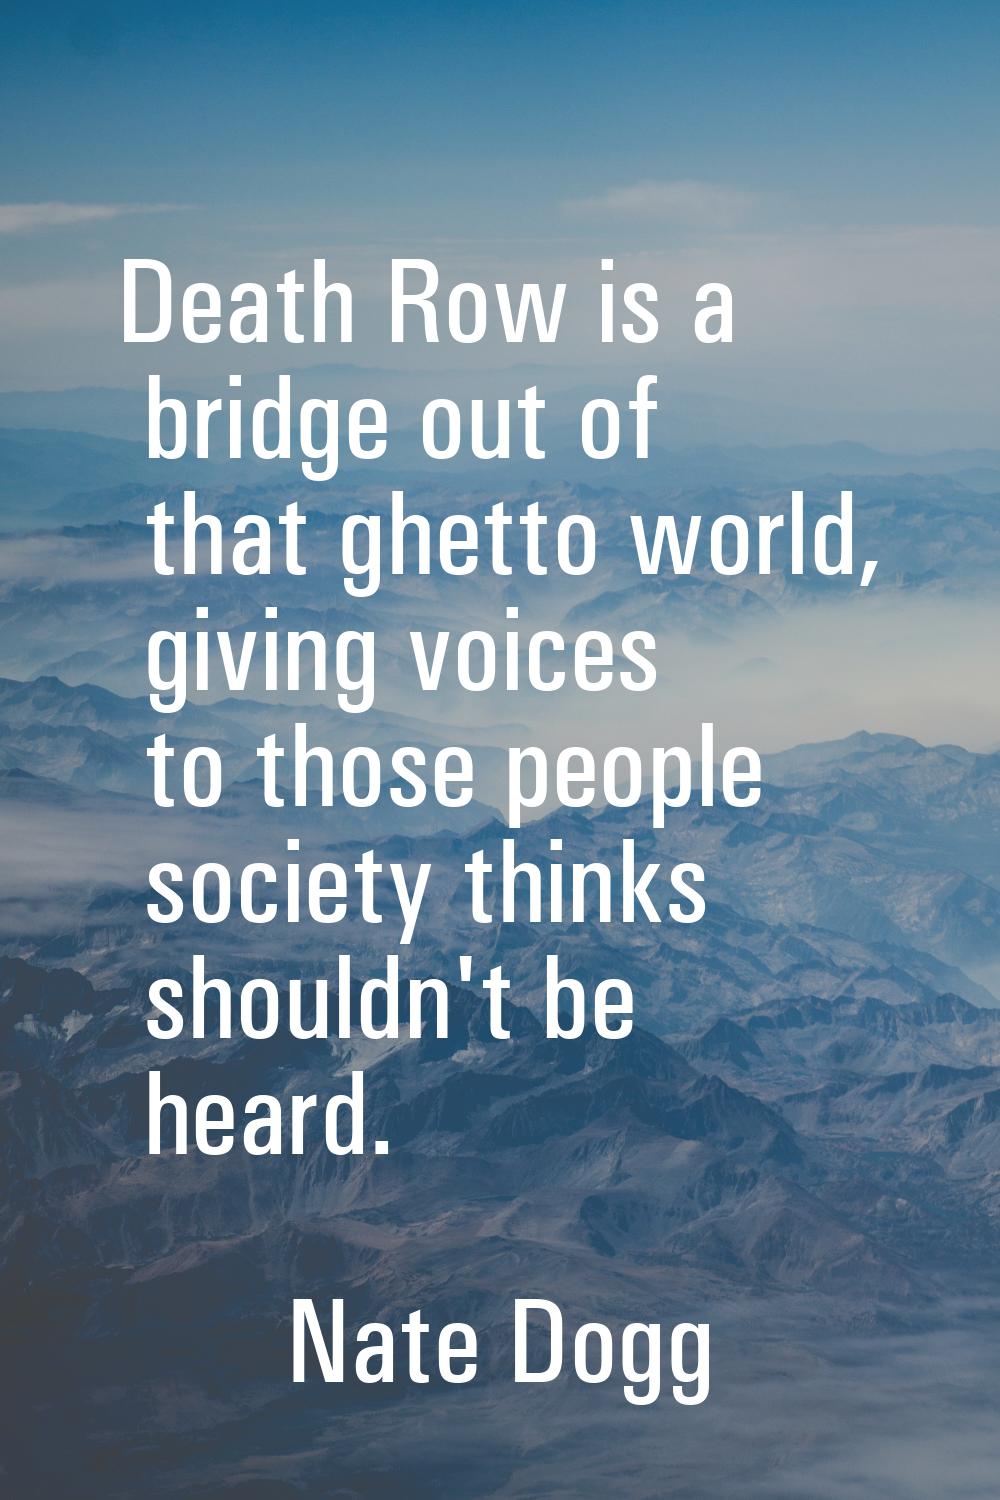 Death Row is a bridge out of that ghetto world, giving voices to those people society thinks should